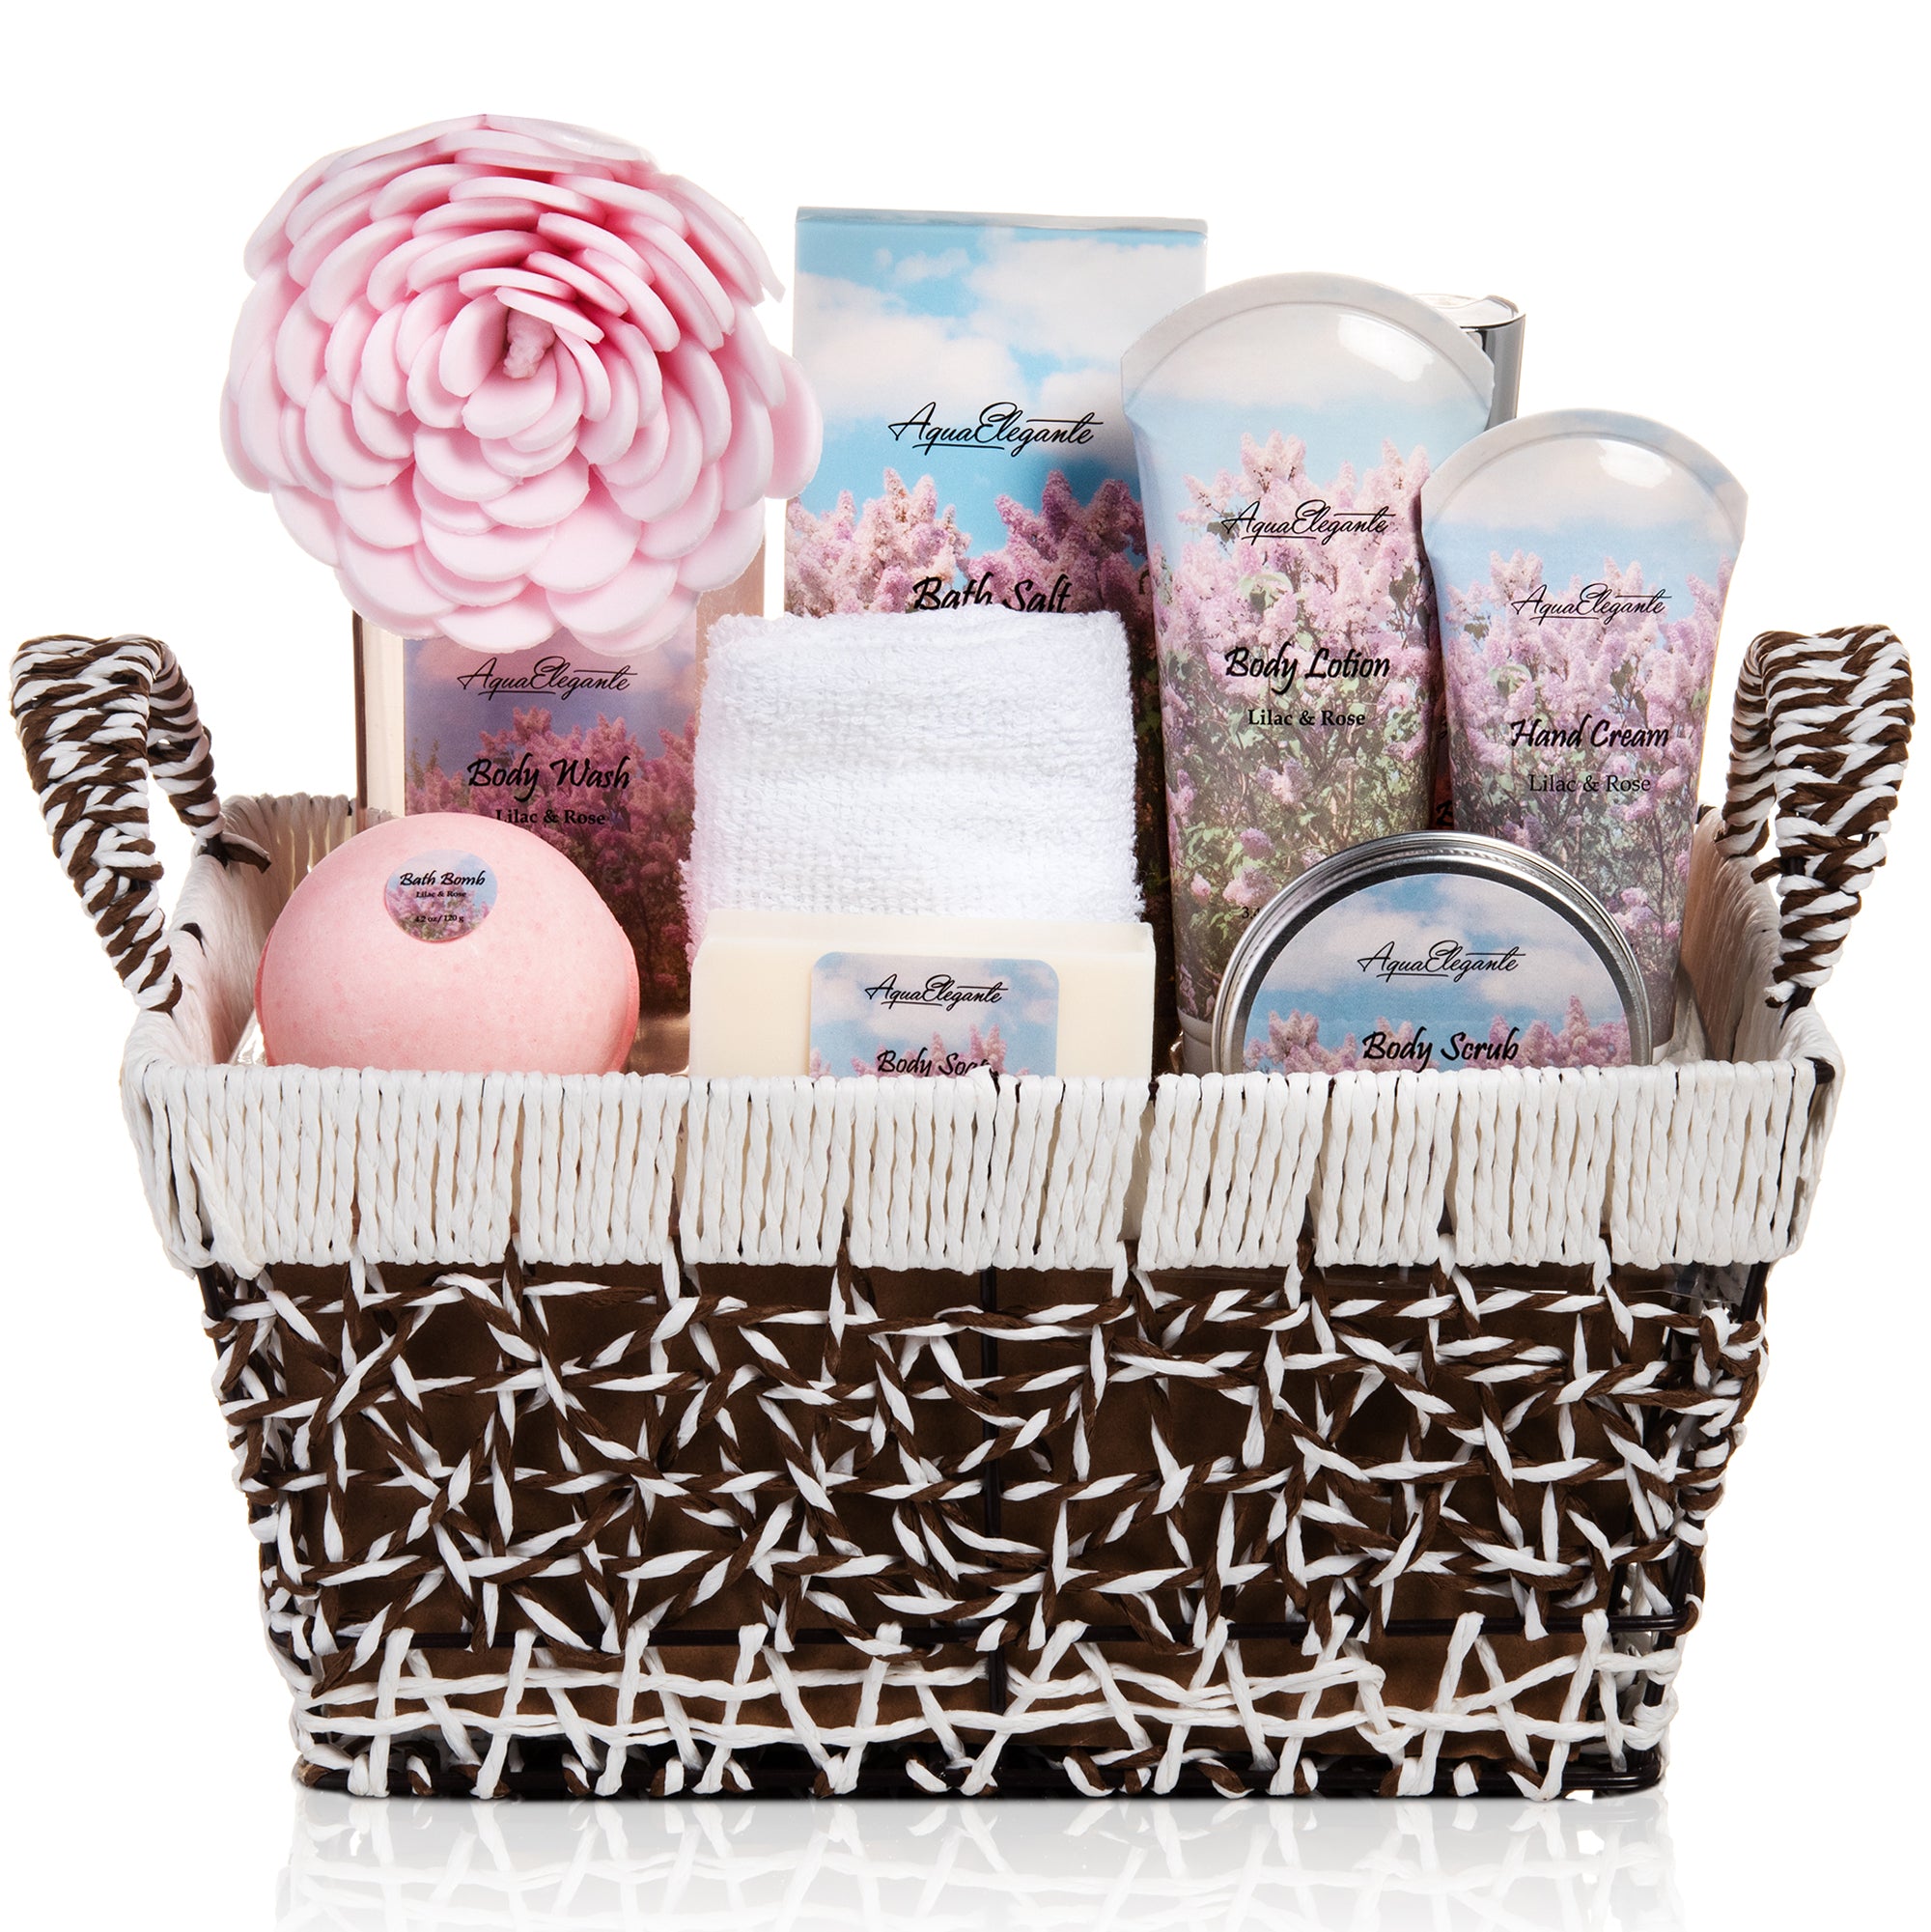 Creative Ideas for Gift Baskets for Women